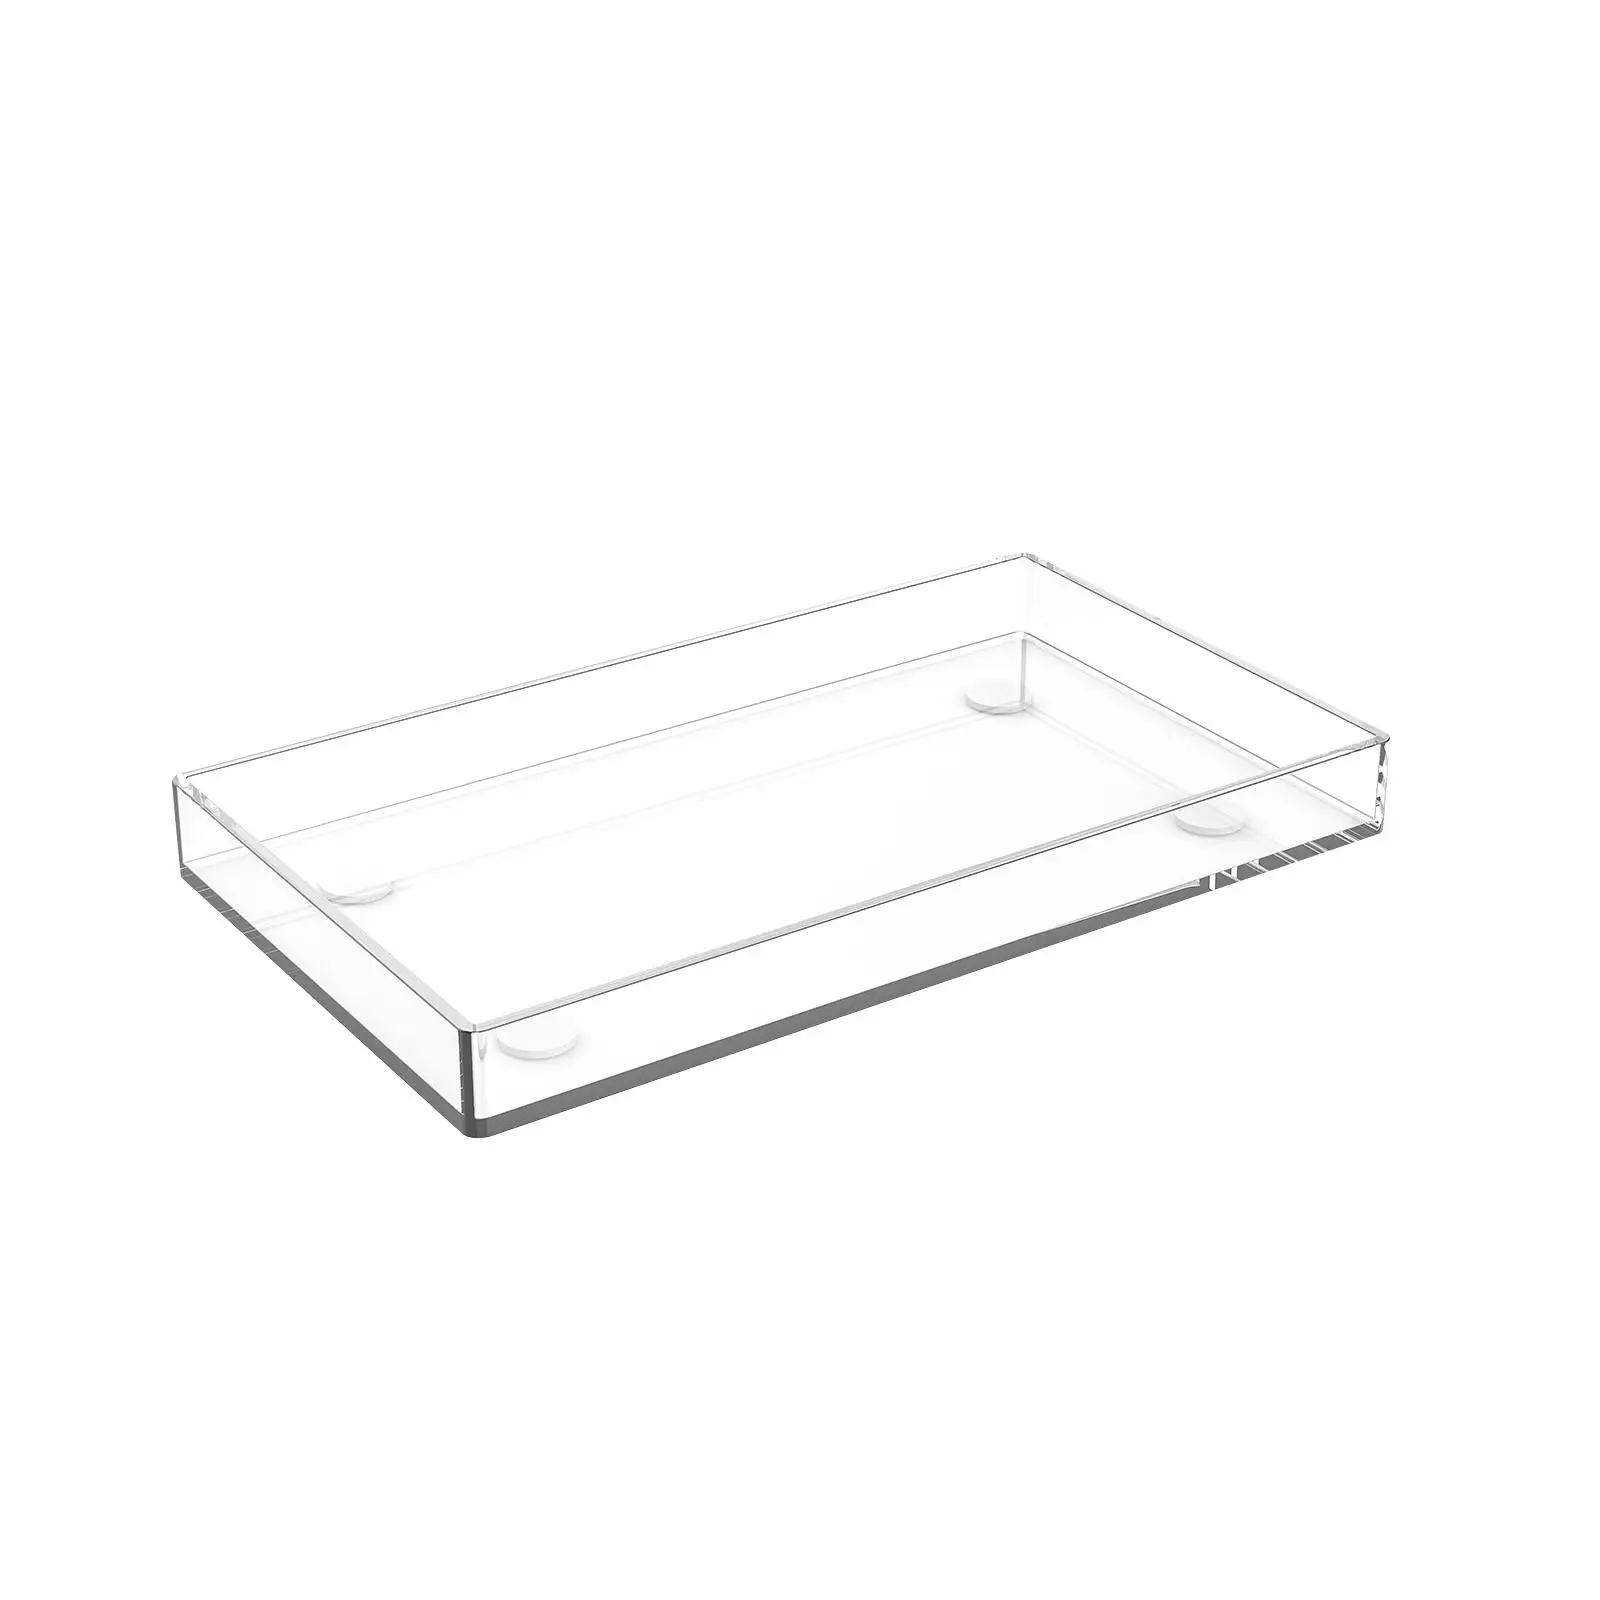 Clear Acrylic Tray Bathroom Vanity Organizer Storage Tray for Towels Cosmetics and Accessories Living Room Bedroom Bathroom